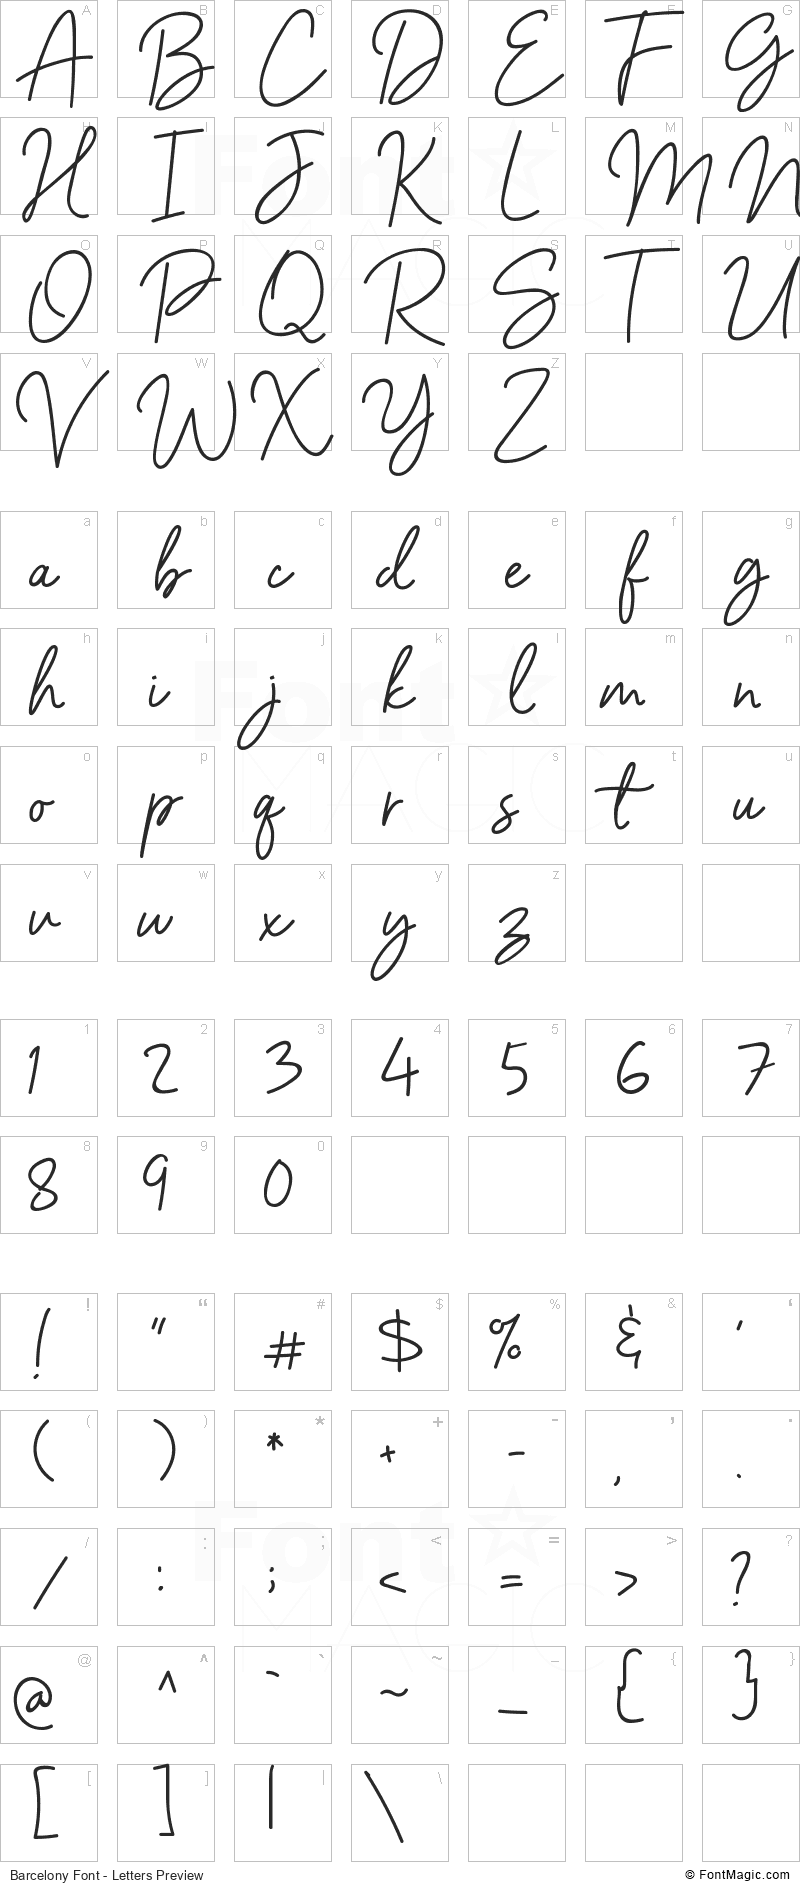 Barcelony Font - All Latters Preview Chart